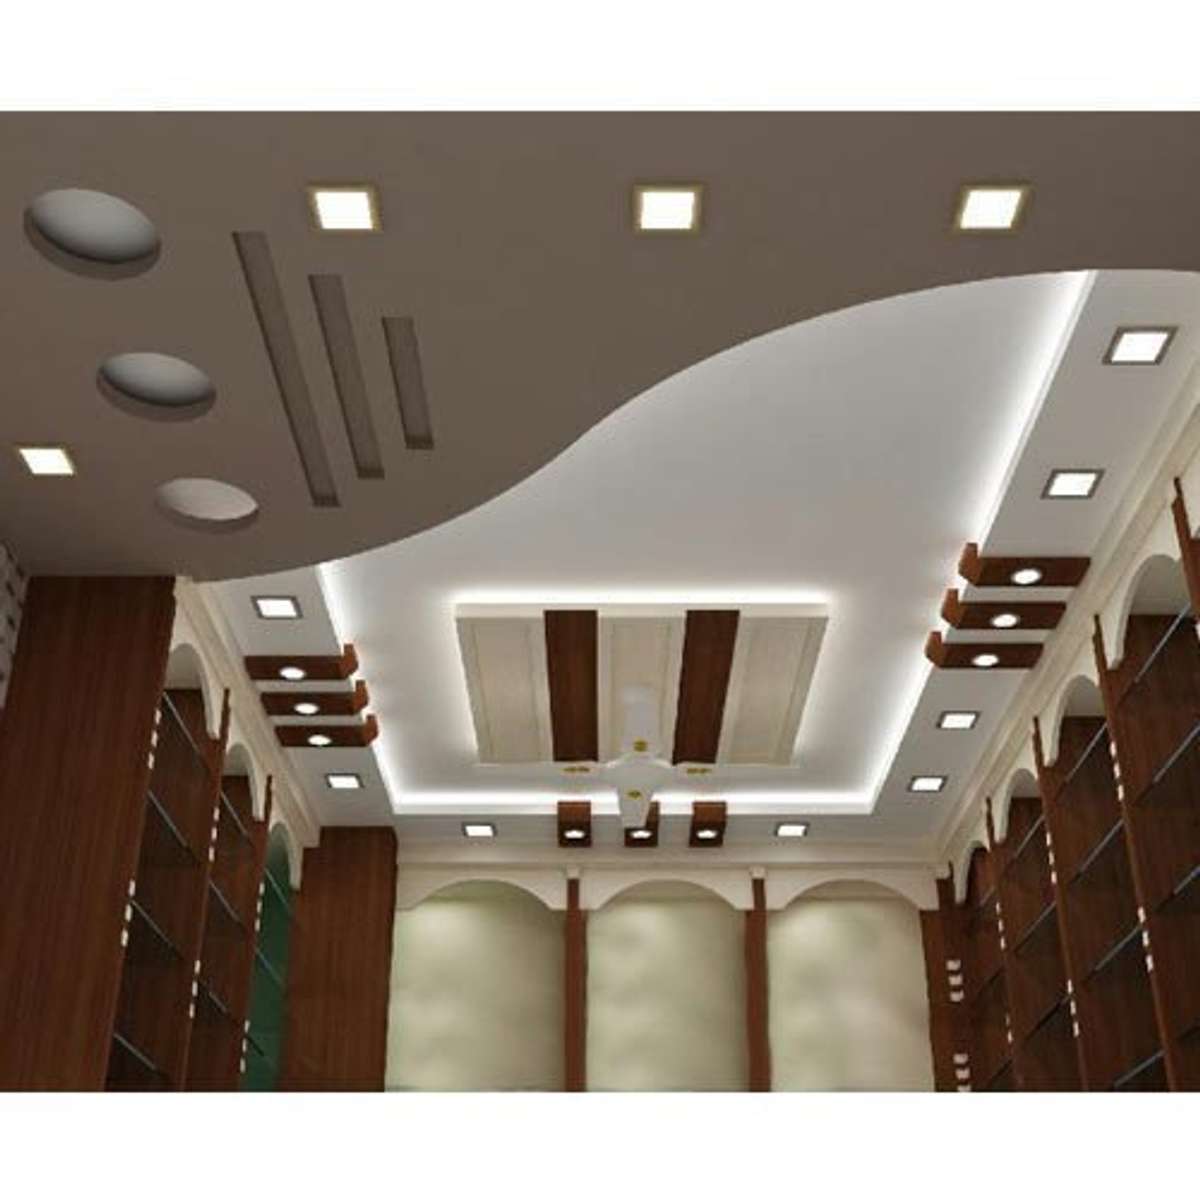 Ceiling, Lighting Designs by Electric Works A S electric work ...